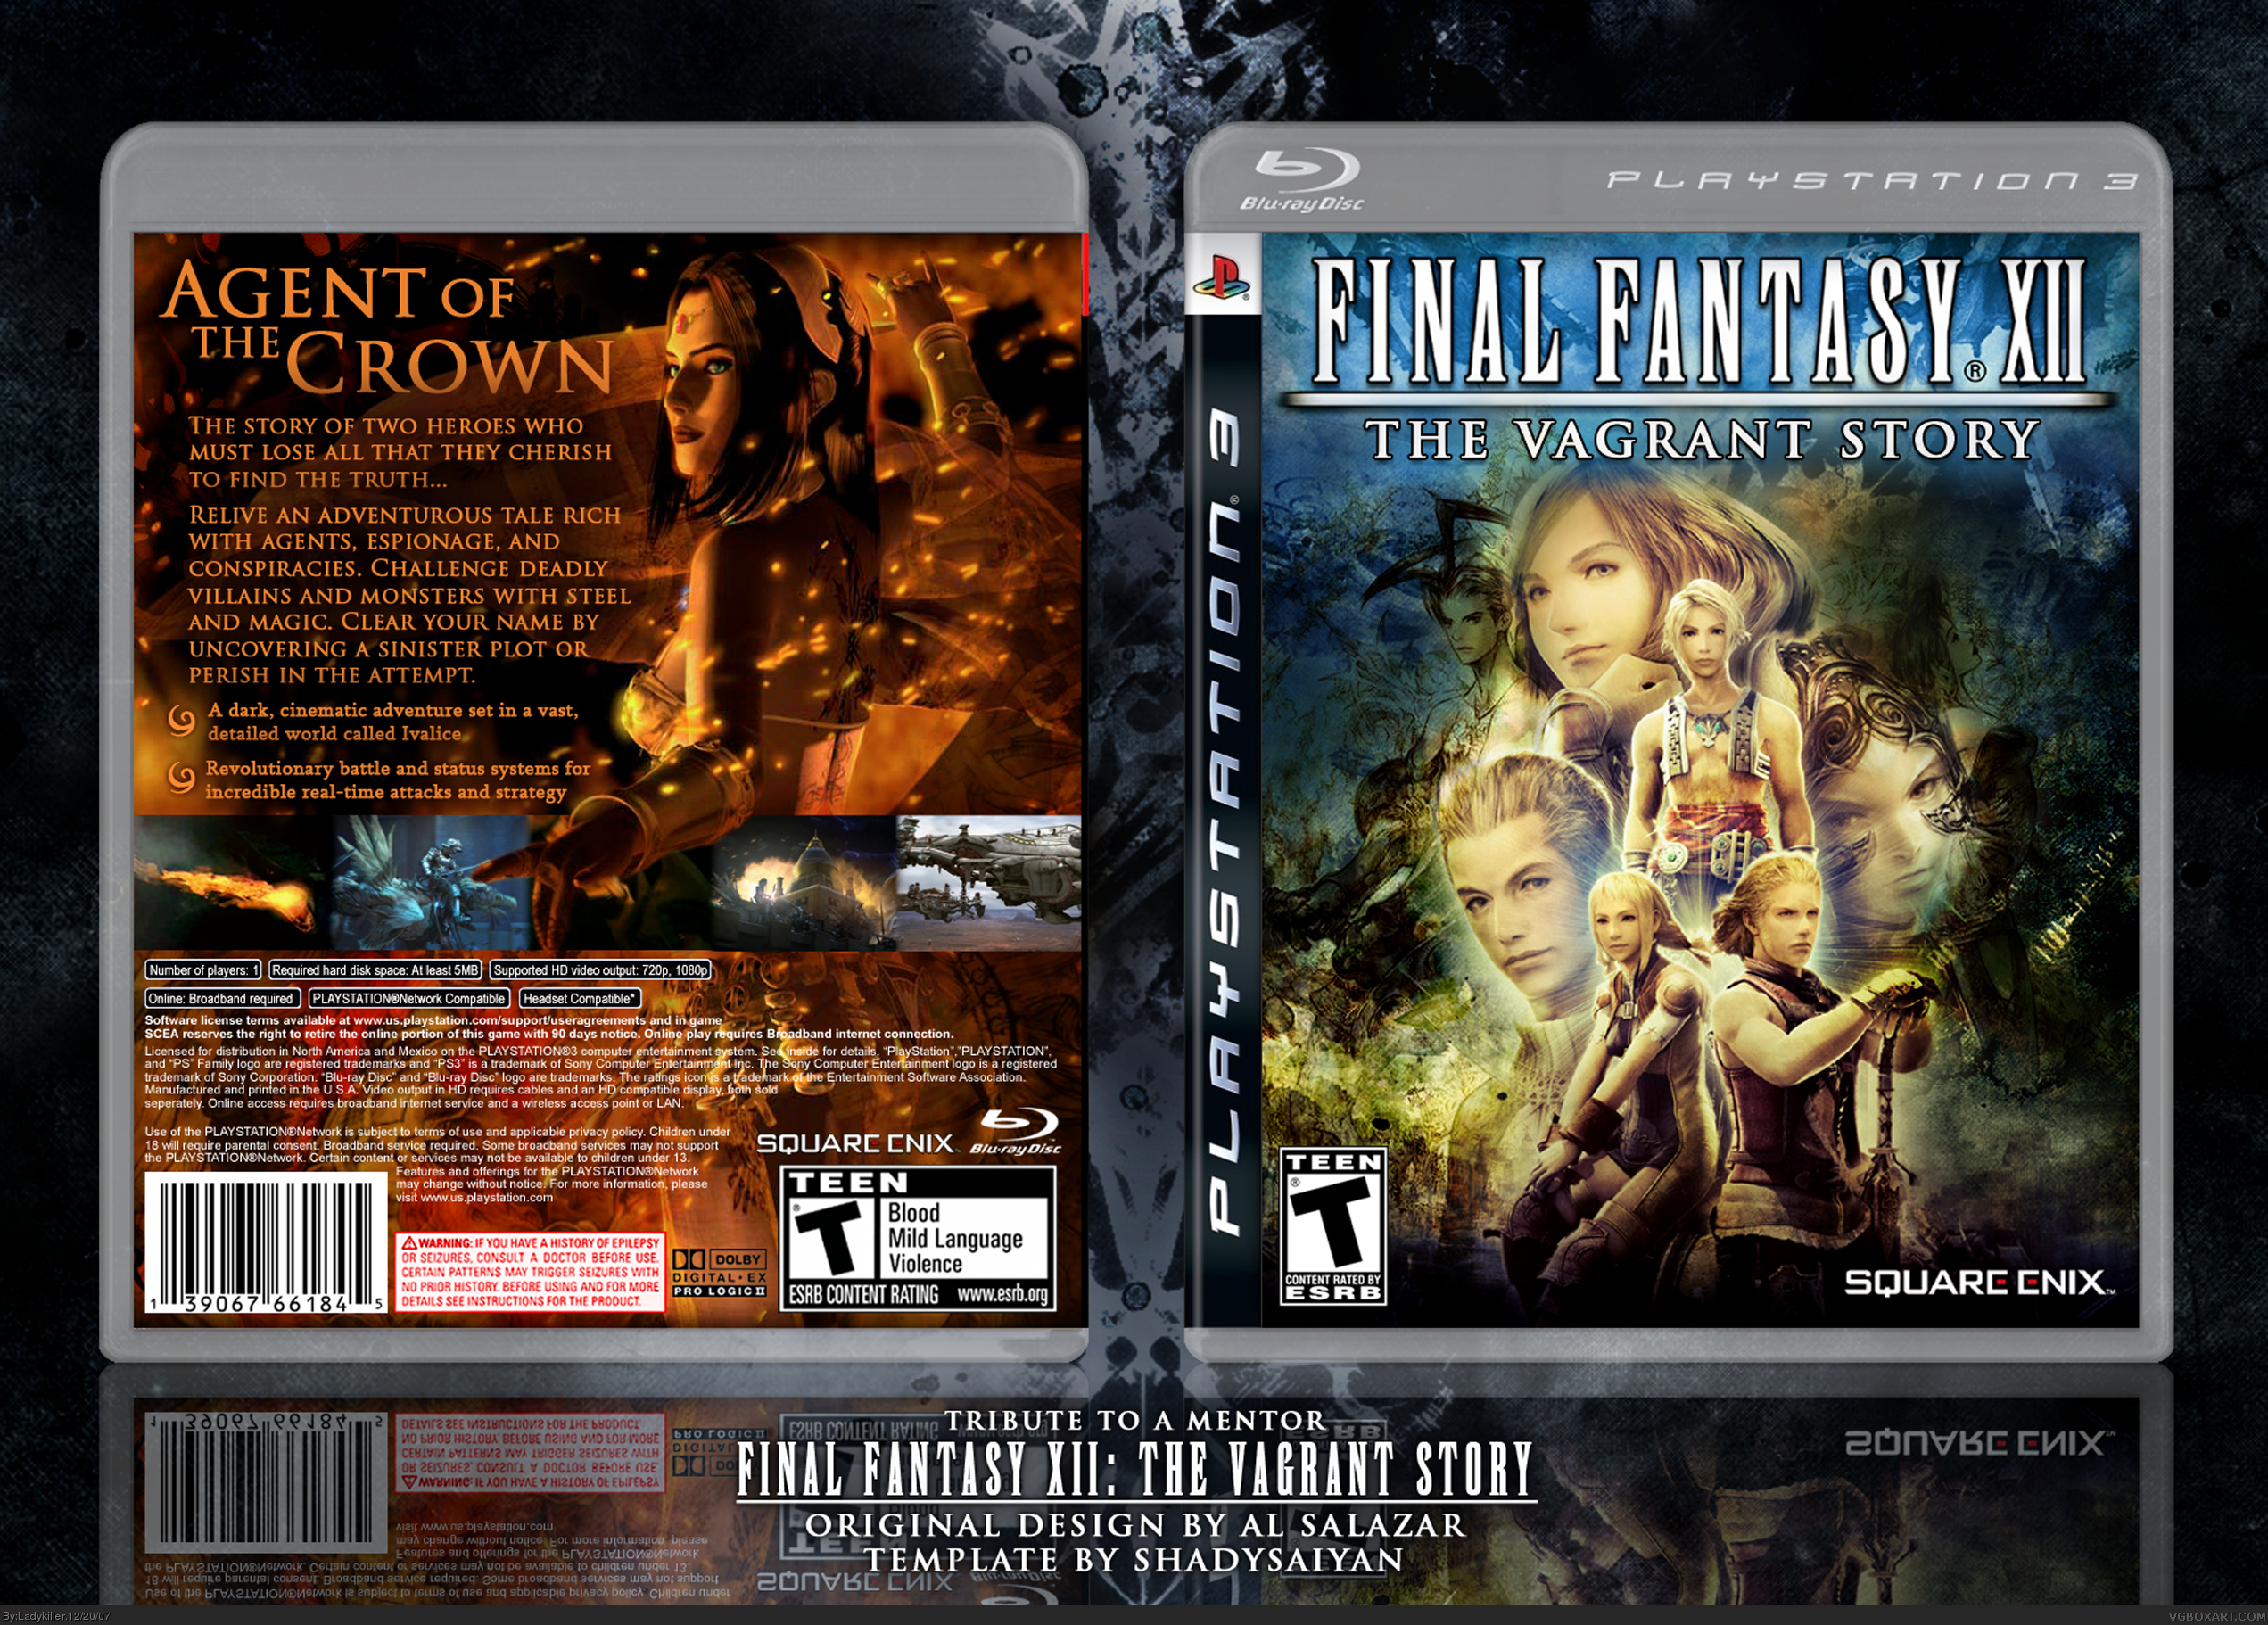 Final Fantasy XII: The Vagrant Story box cover